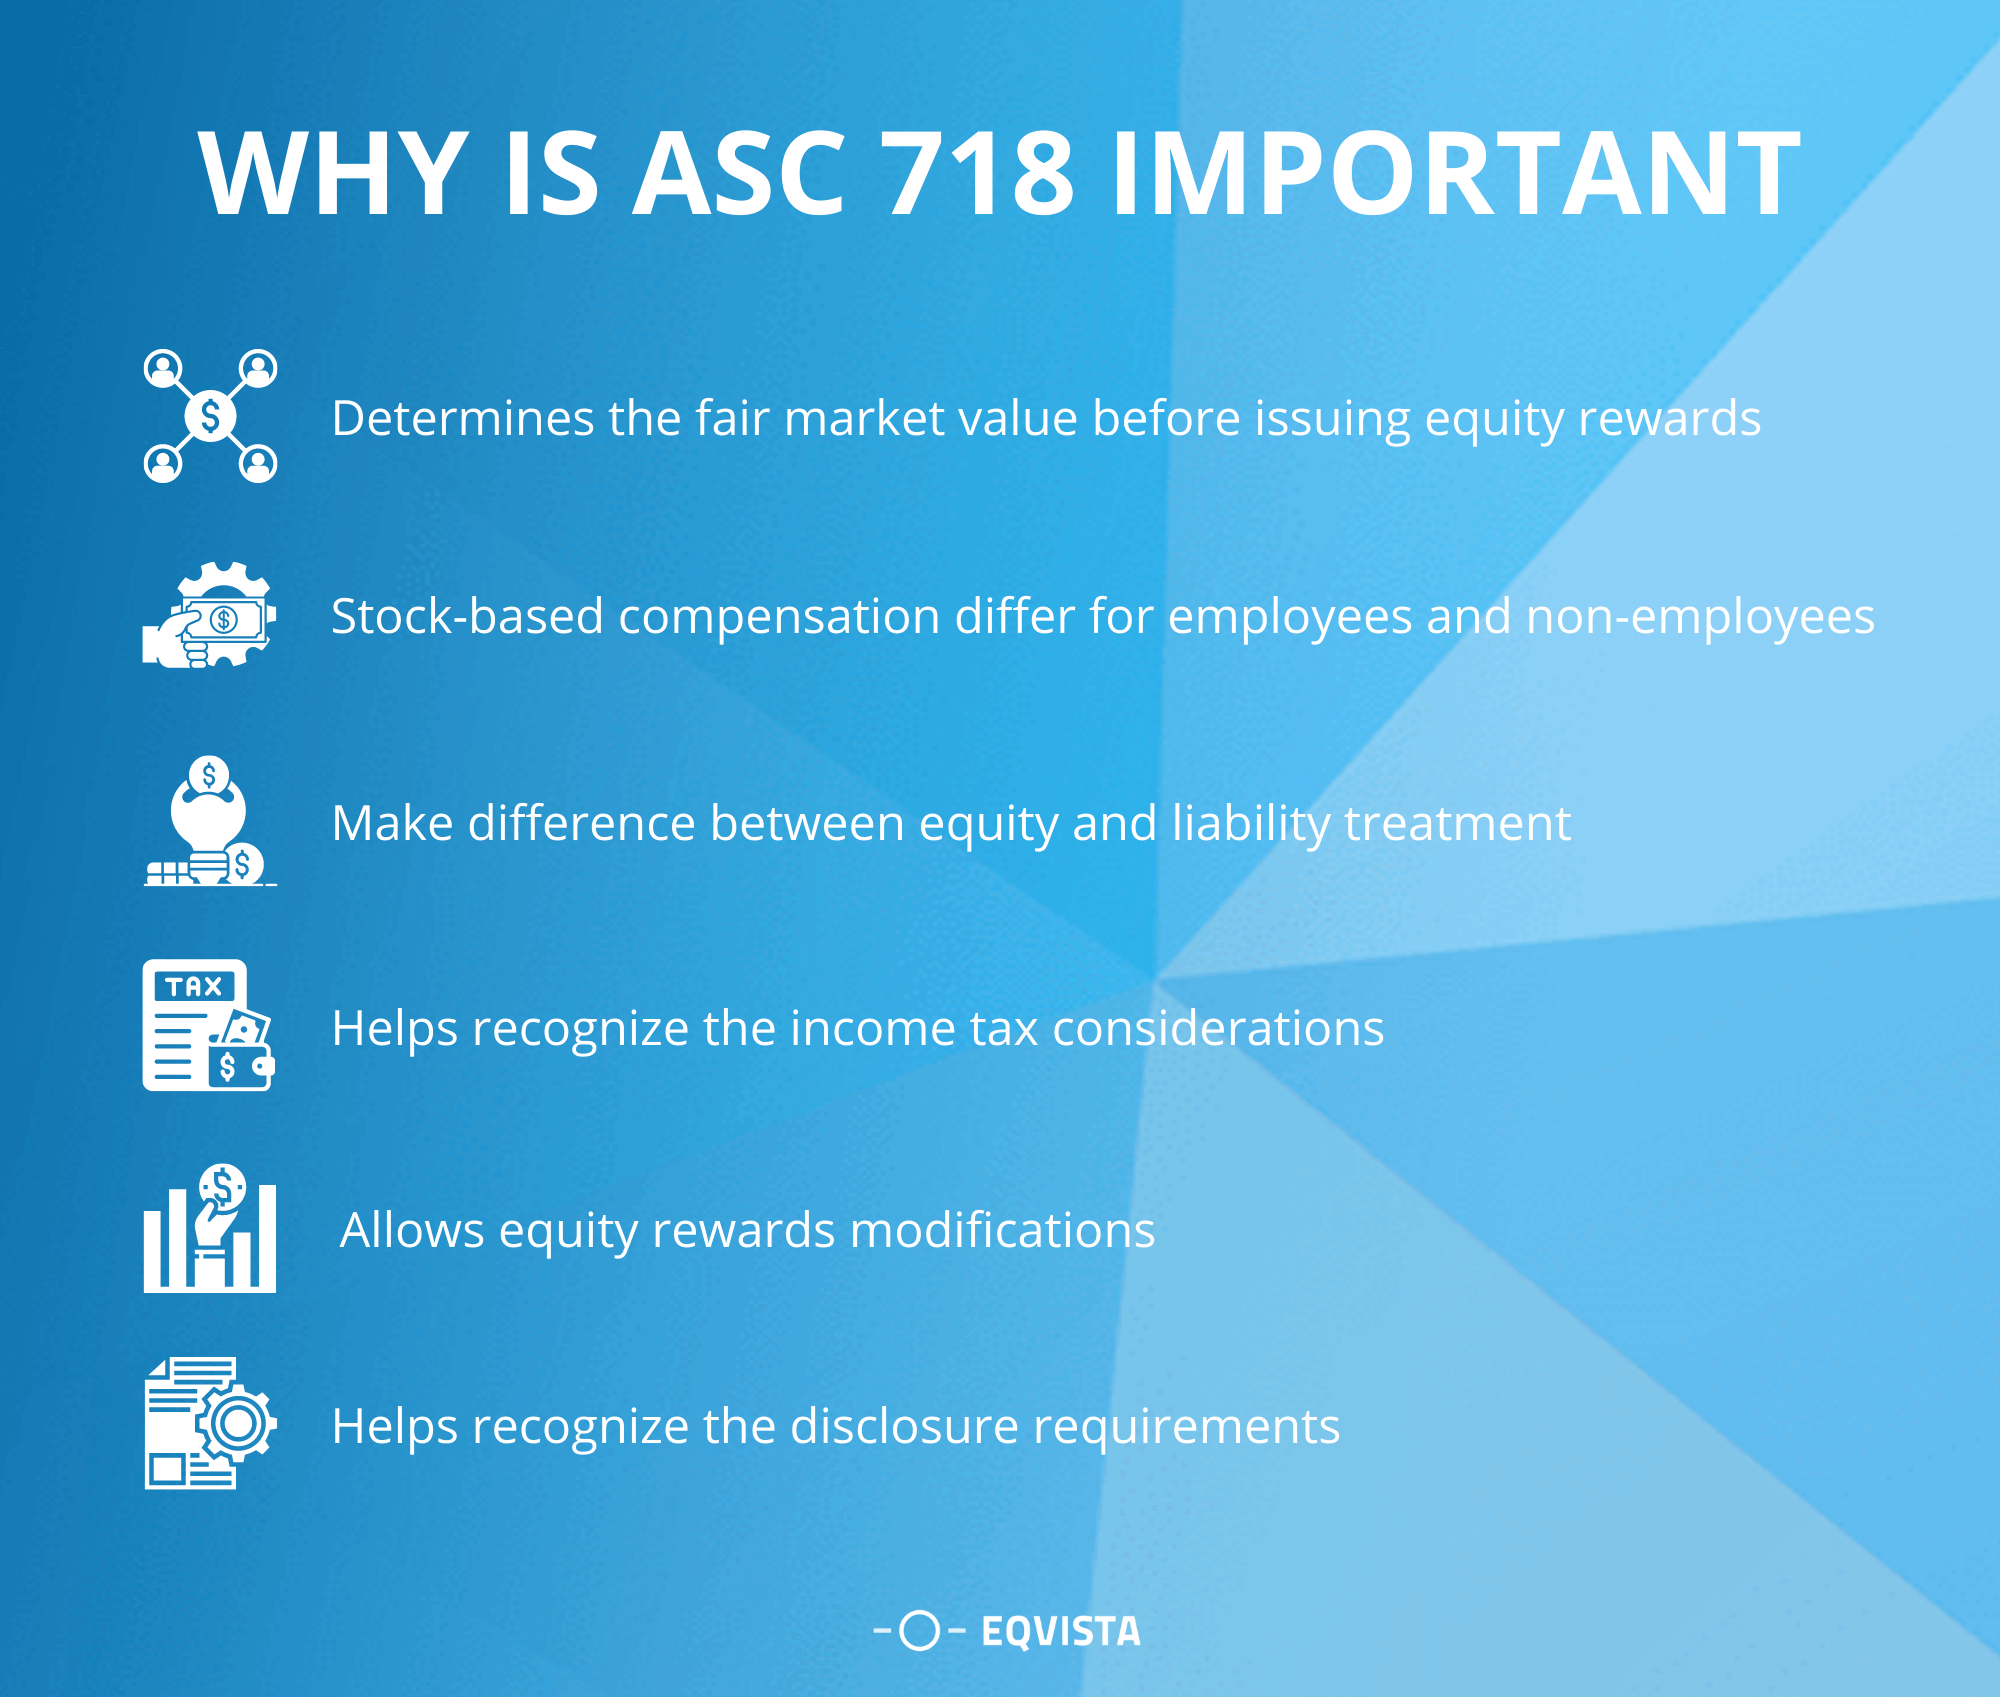 Why is ASC 718 important?